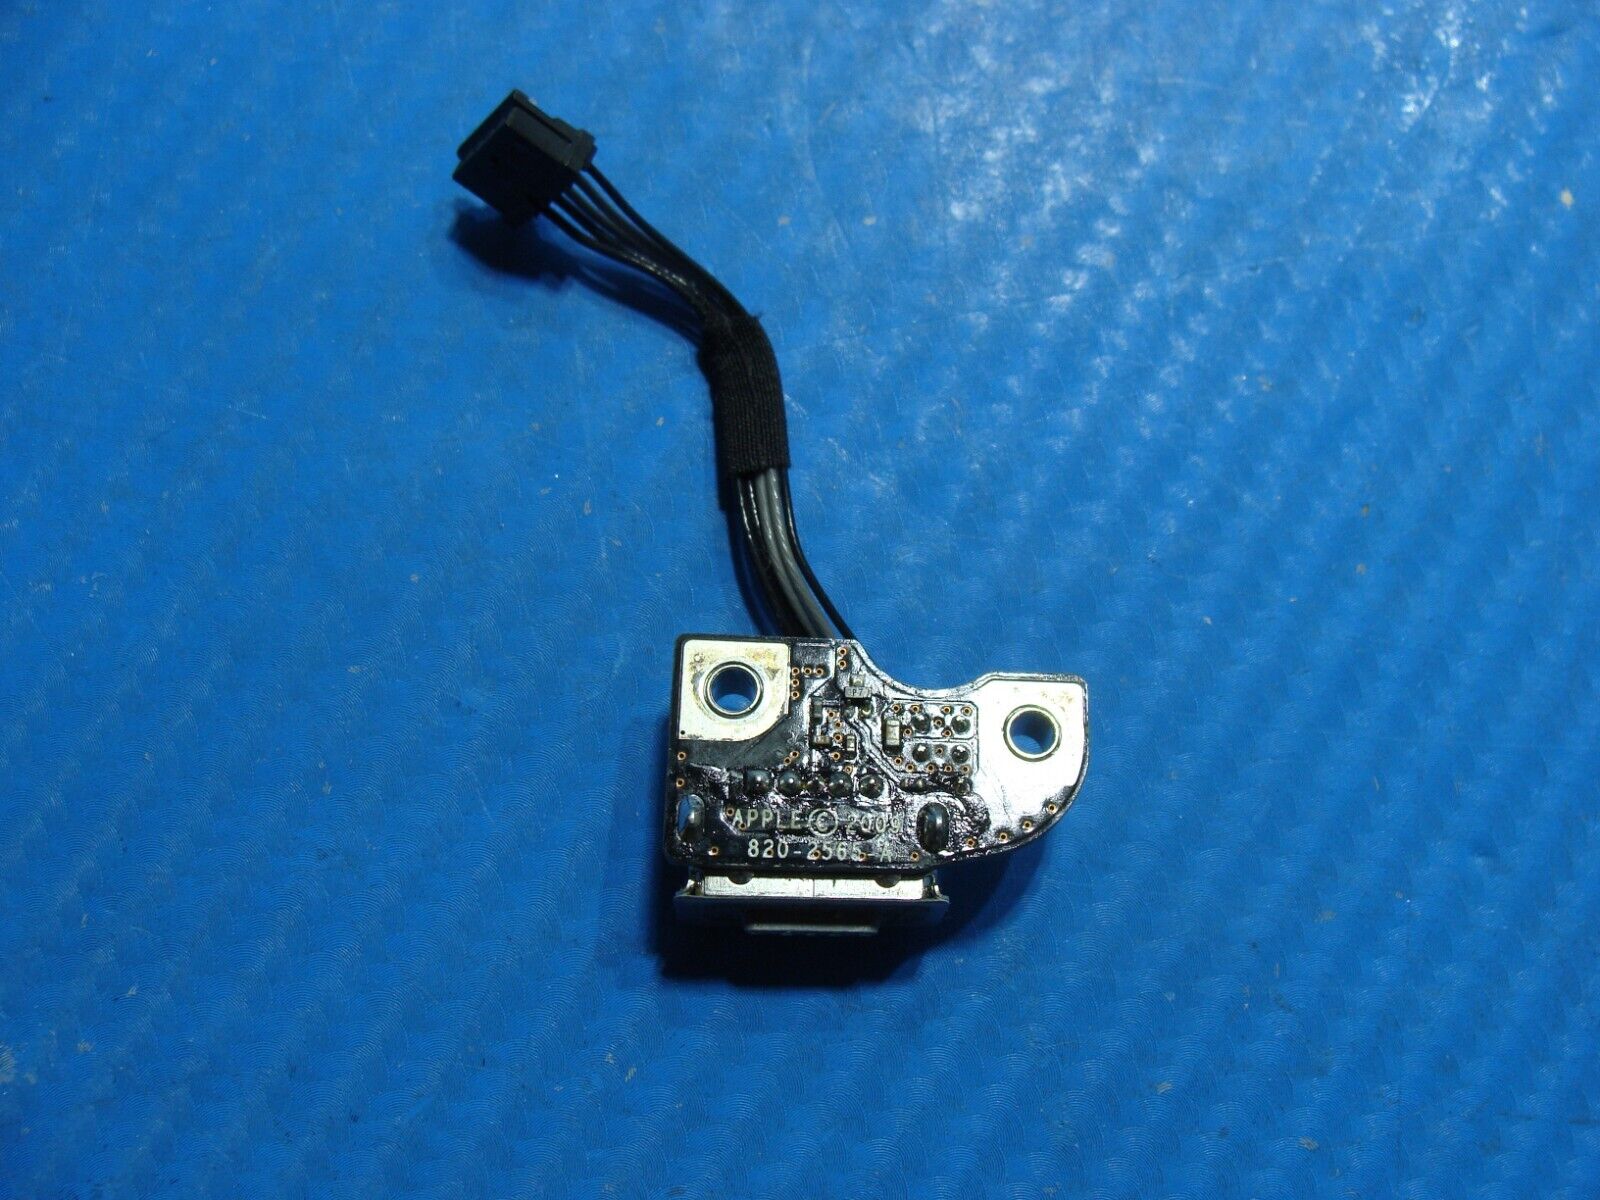 MacBook Pro 13" A1278 Mid 2009 MB991LL/A Genuine MagSage Board w/Cable 661-5235